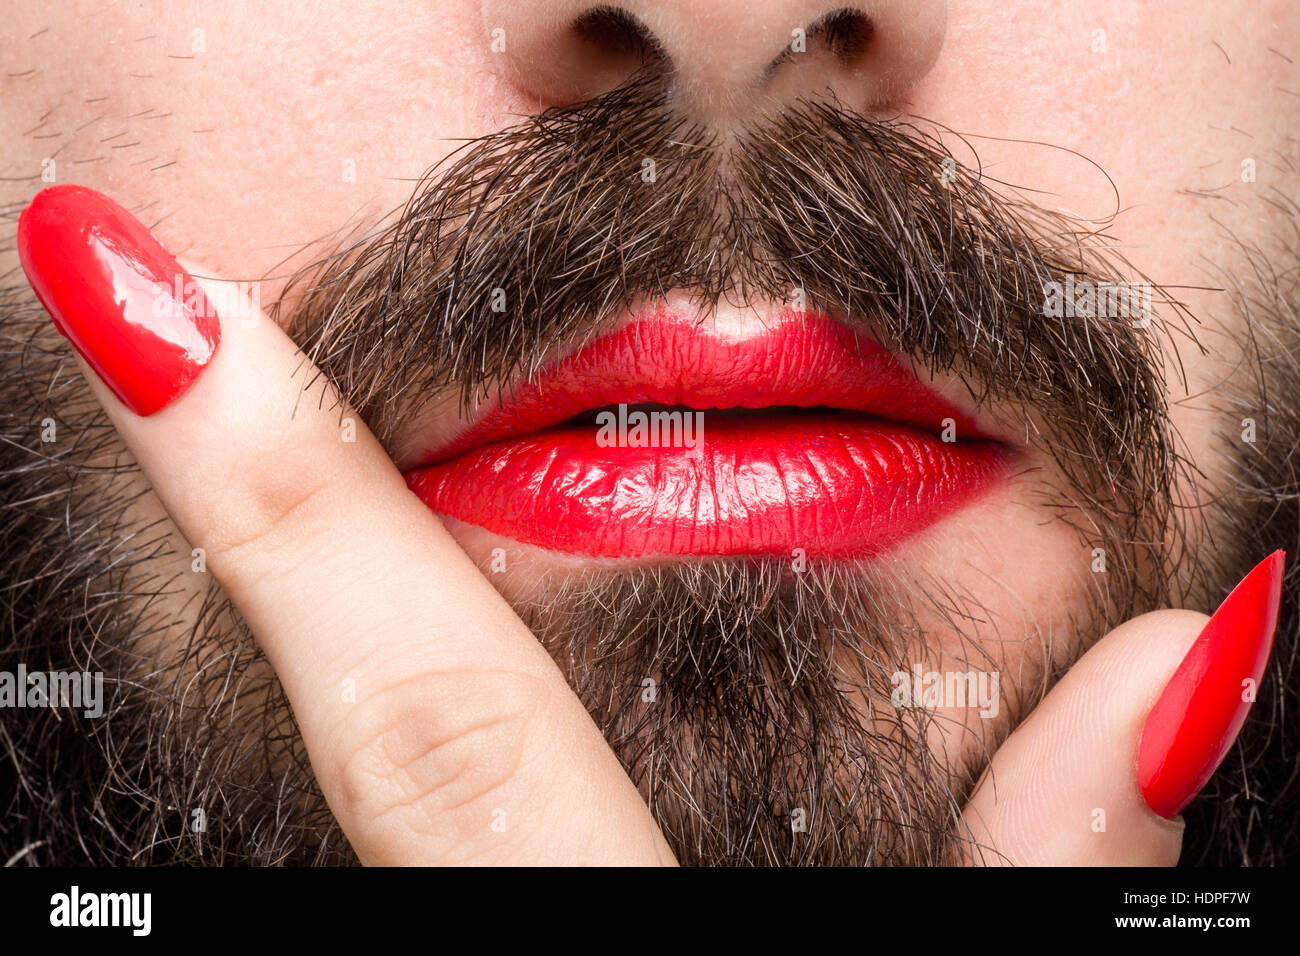 Bearded Man with Red Lipstick on His Lips and Nail Polish Stock Photo